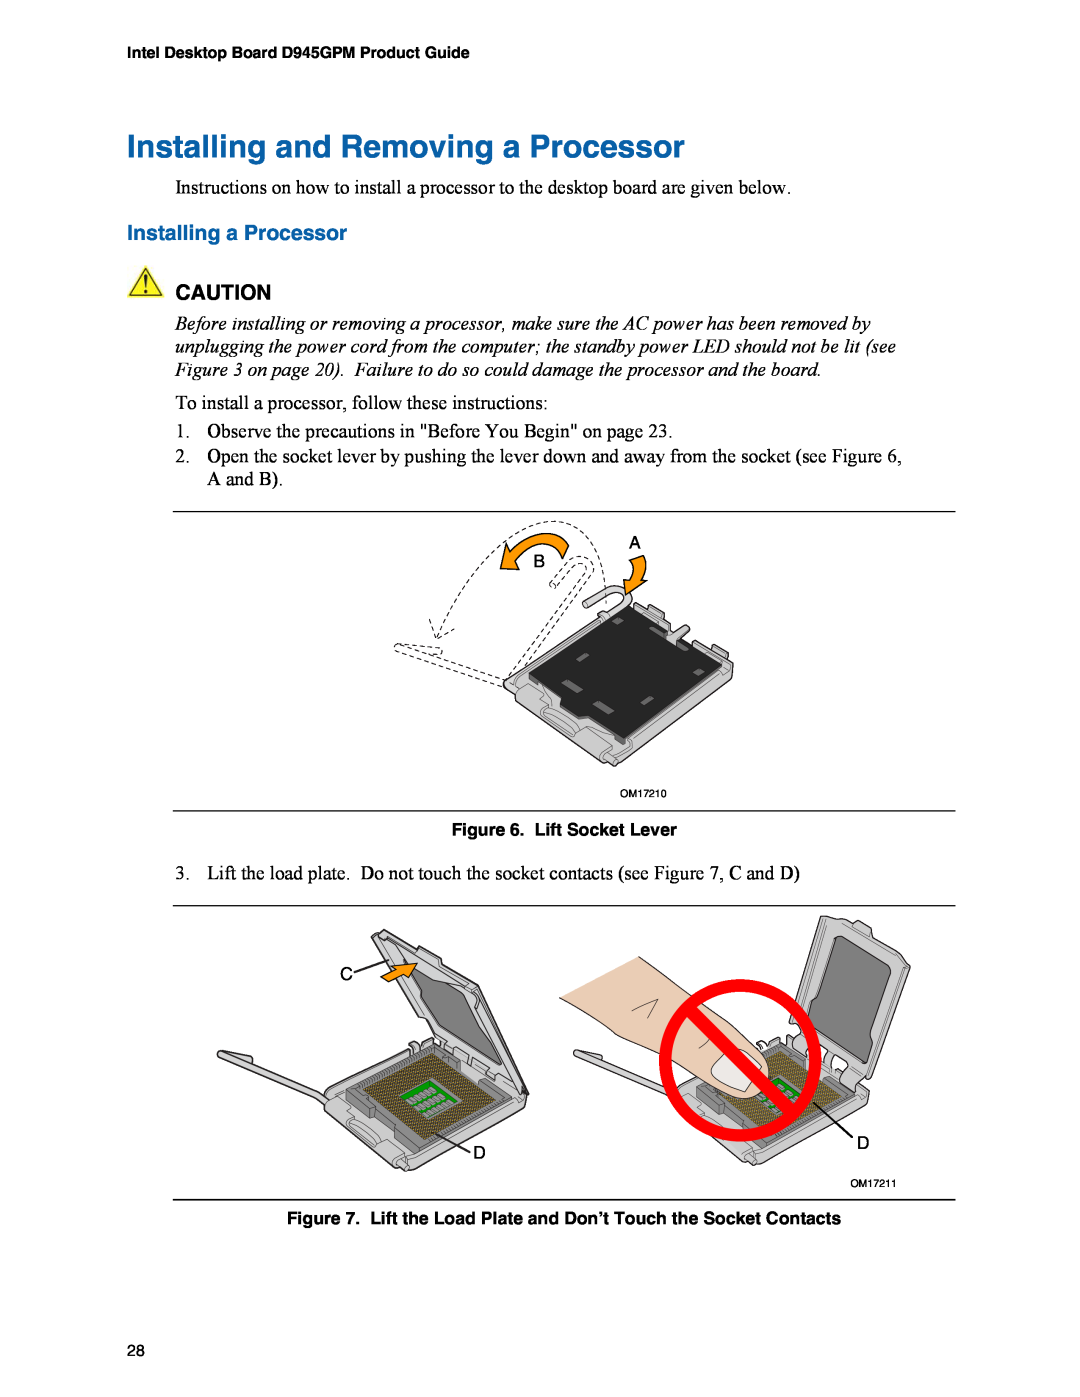 Intel D945GPM manual Installing and Removing a Processor, Installing a Processor 